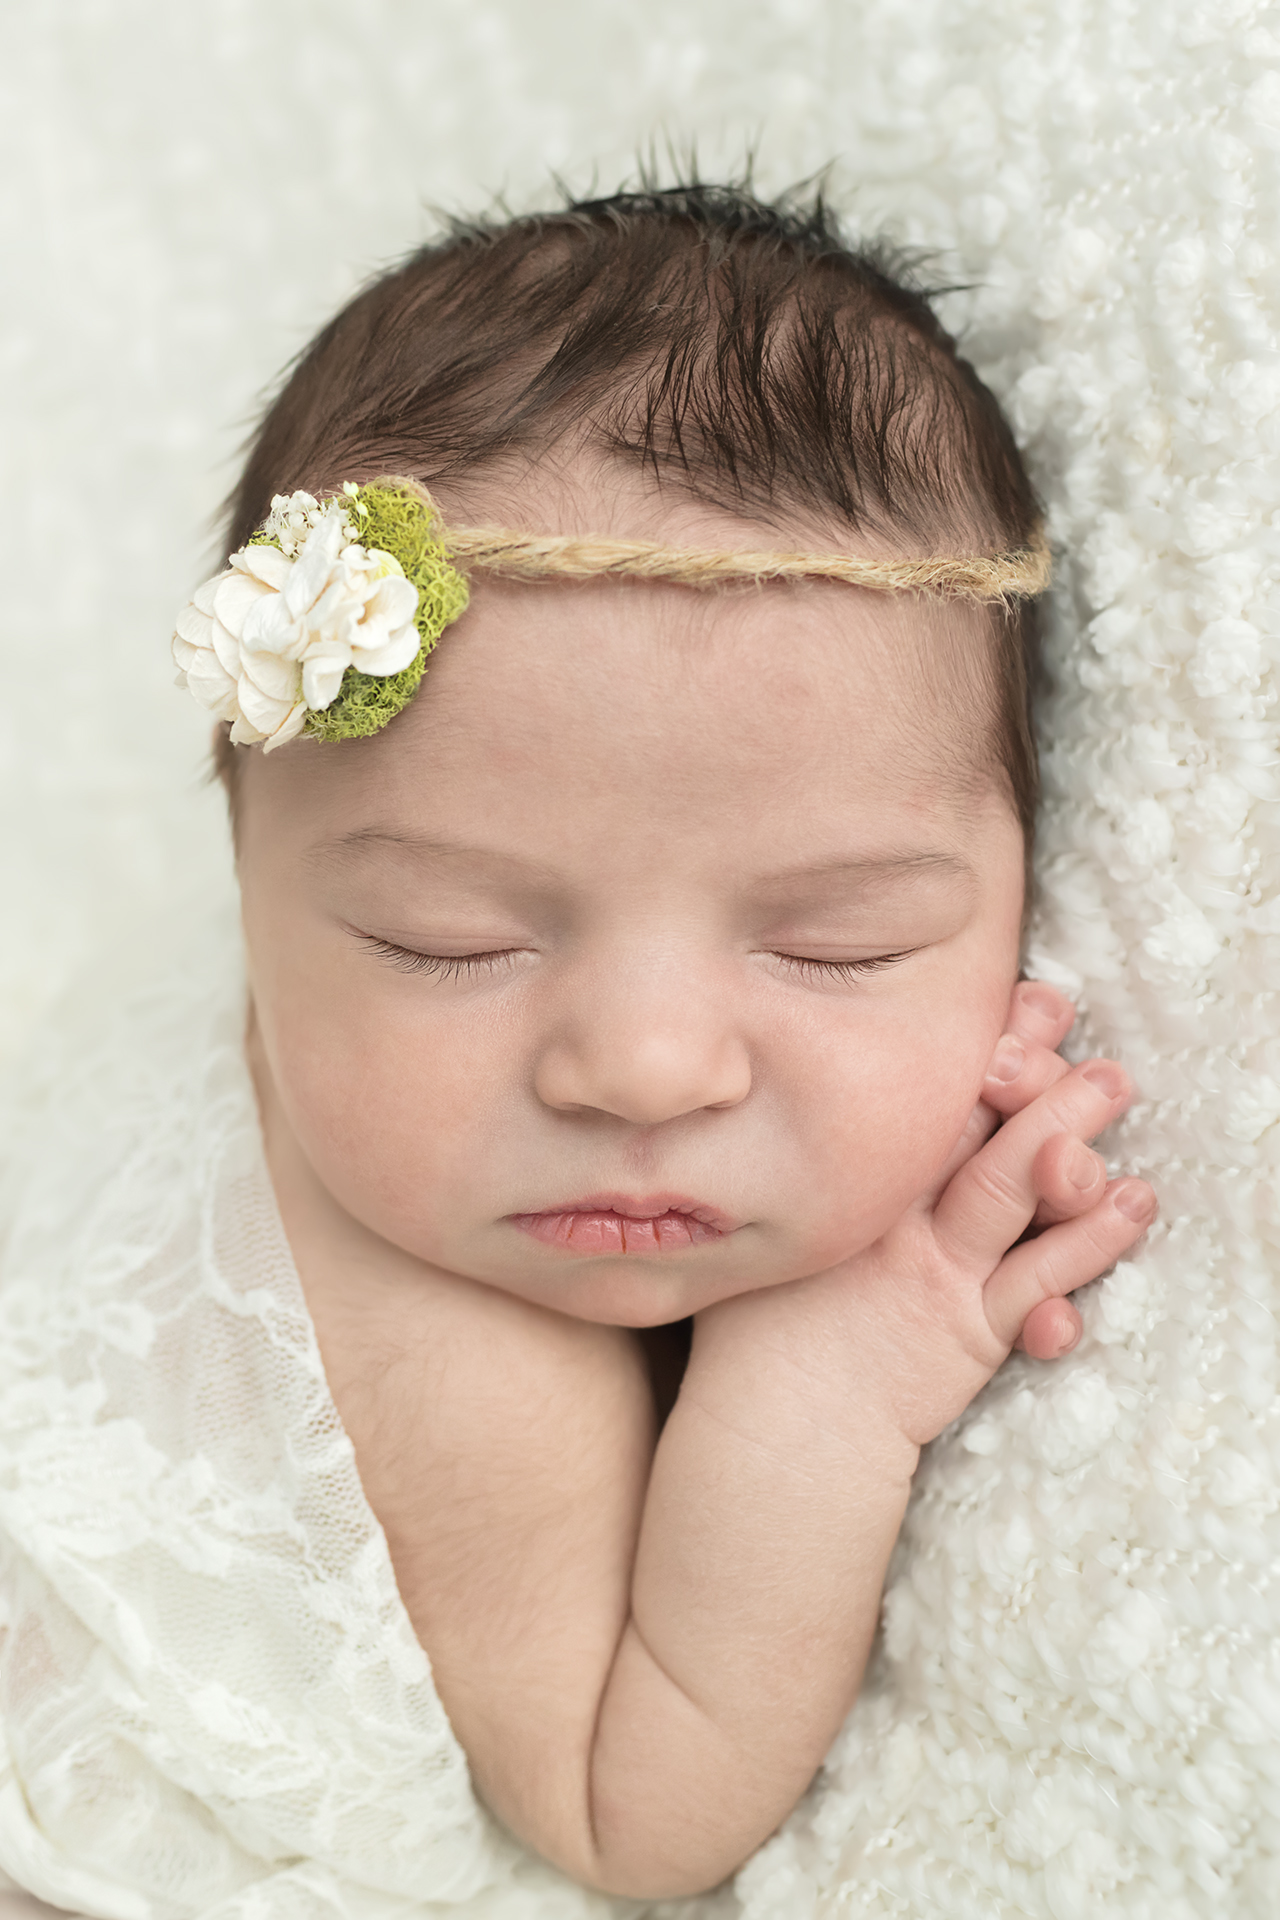 Posed newborn portrait session of baby girl on cream blanket with white flower headband with close up of hand clasped and adorable face